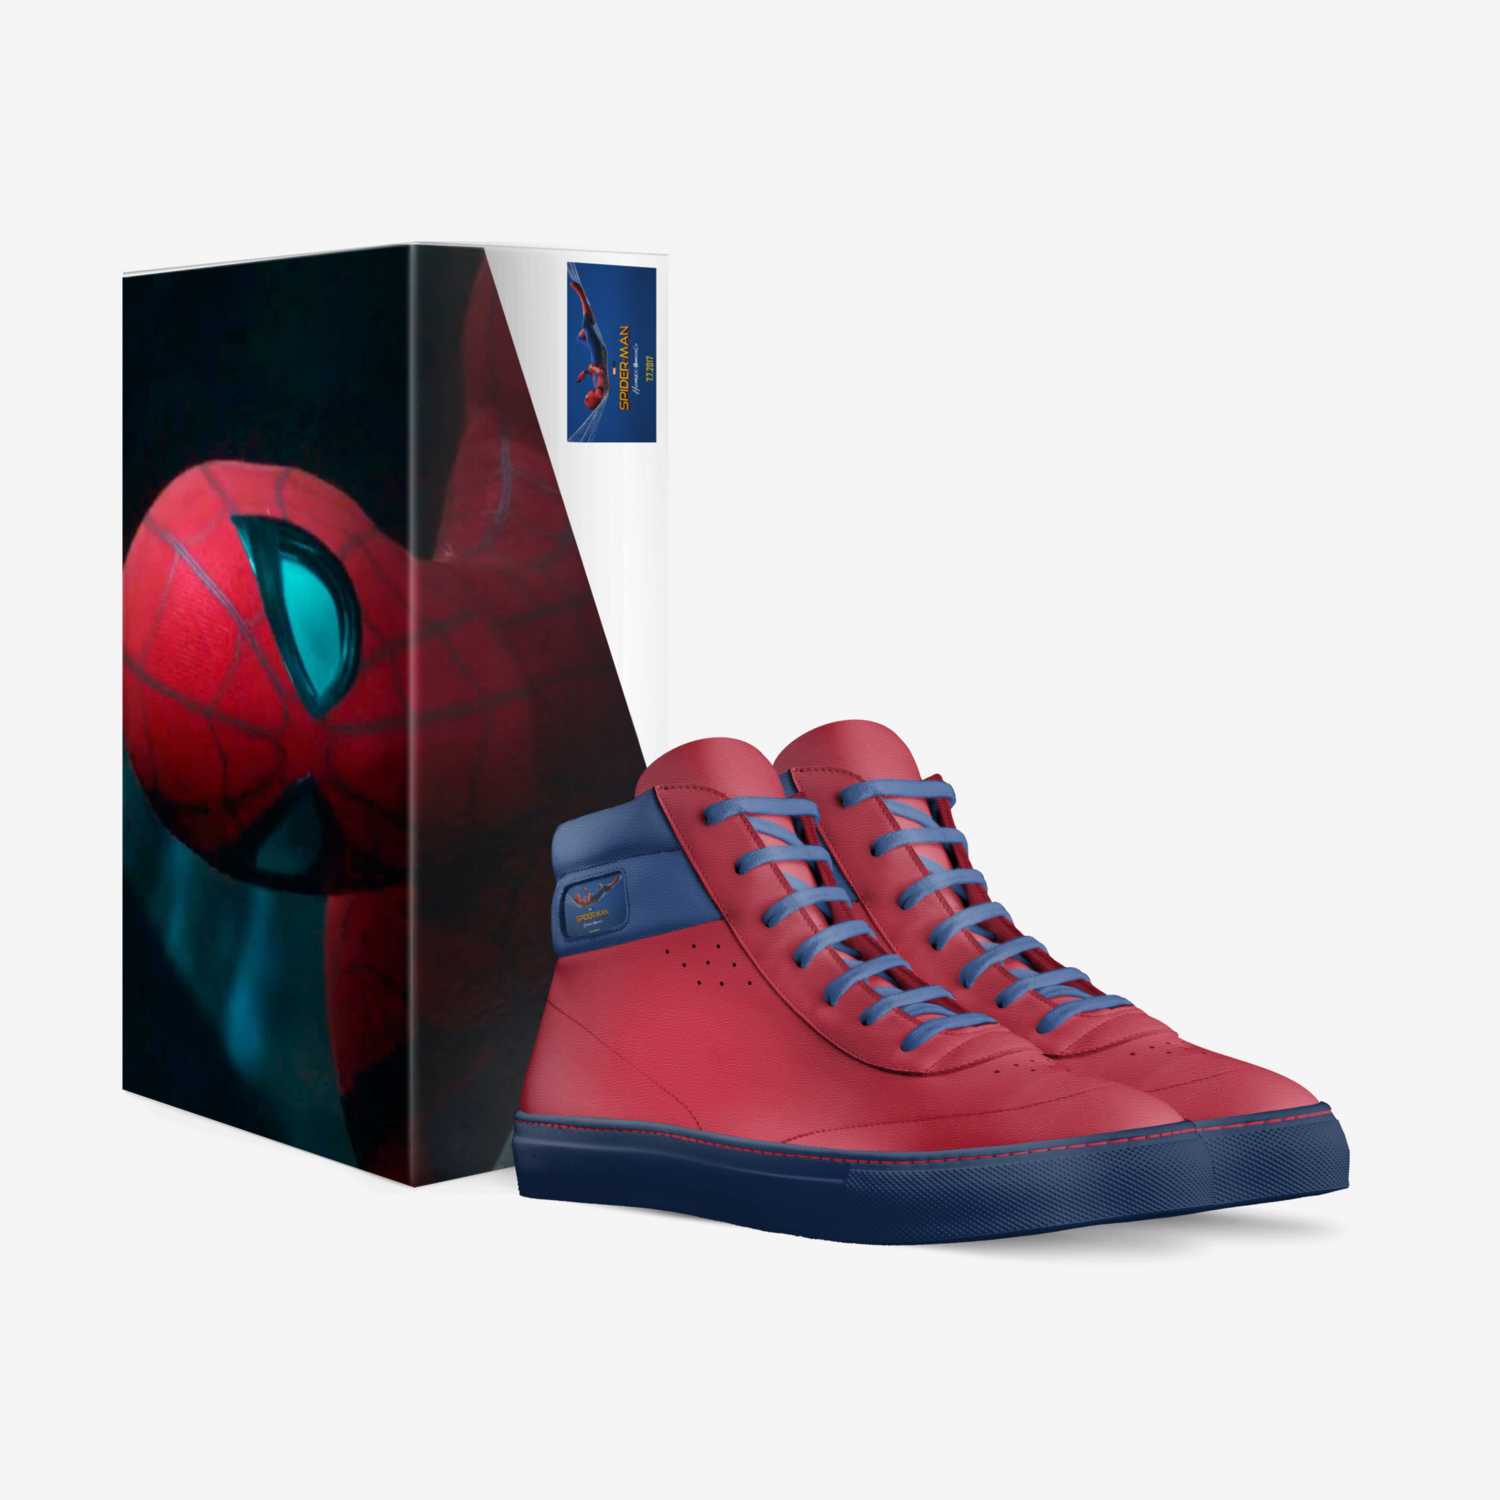 Spider custom made in Italy shoes by Yugi | Box view